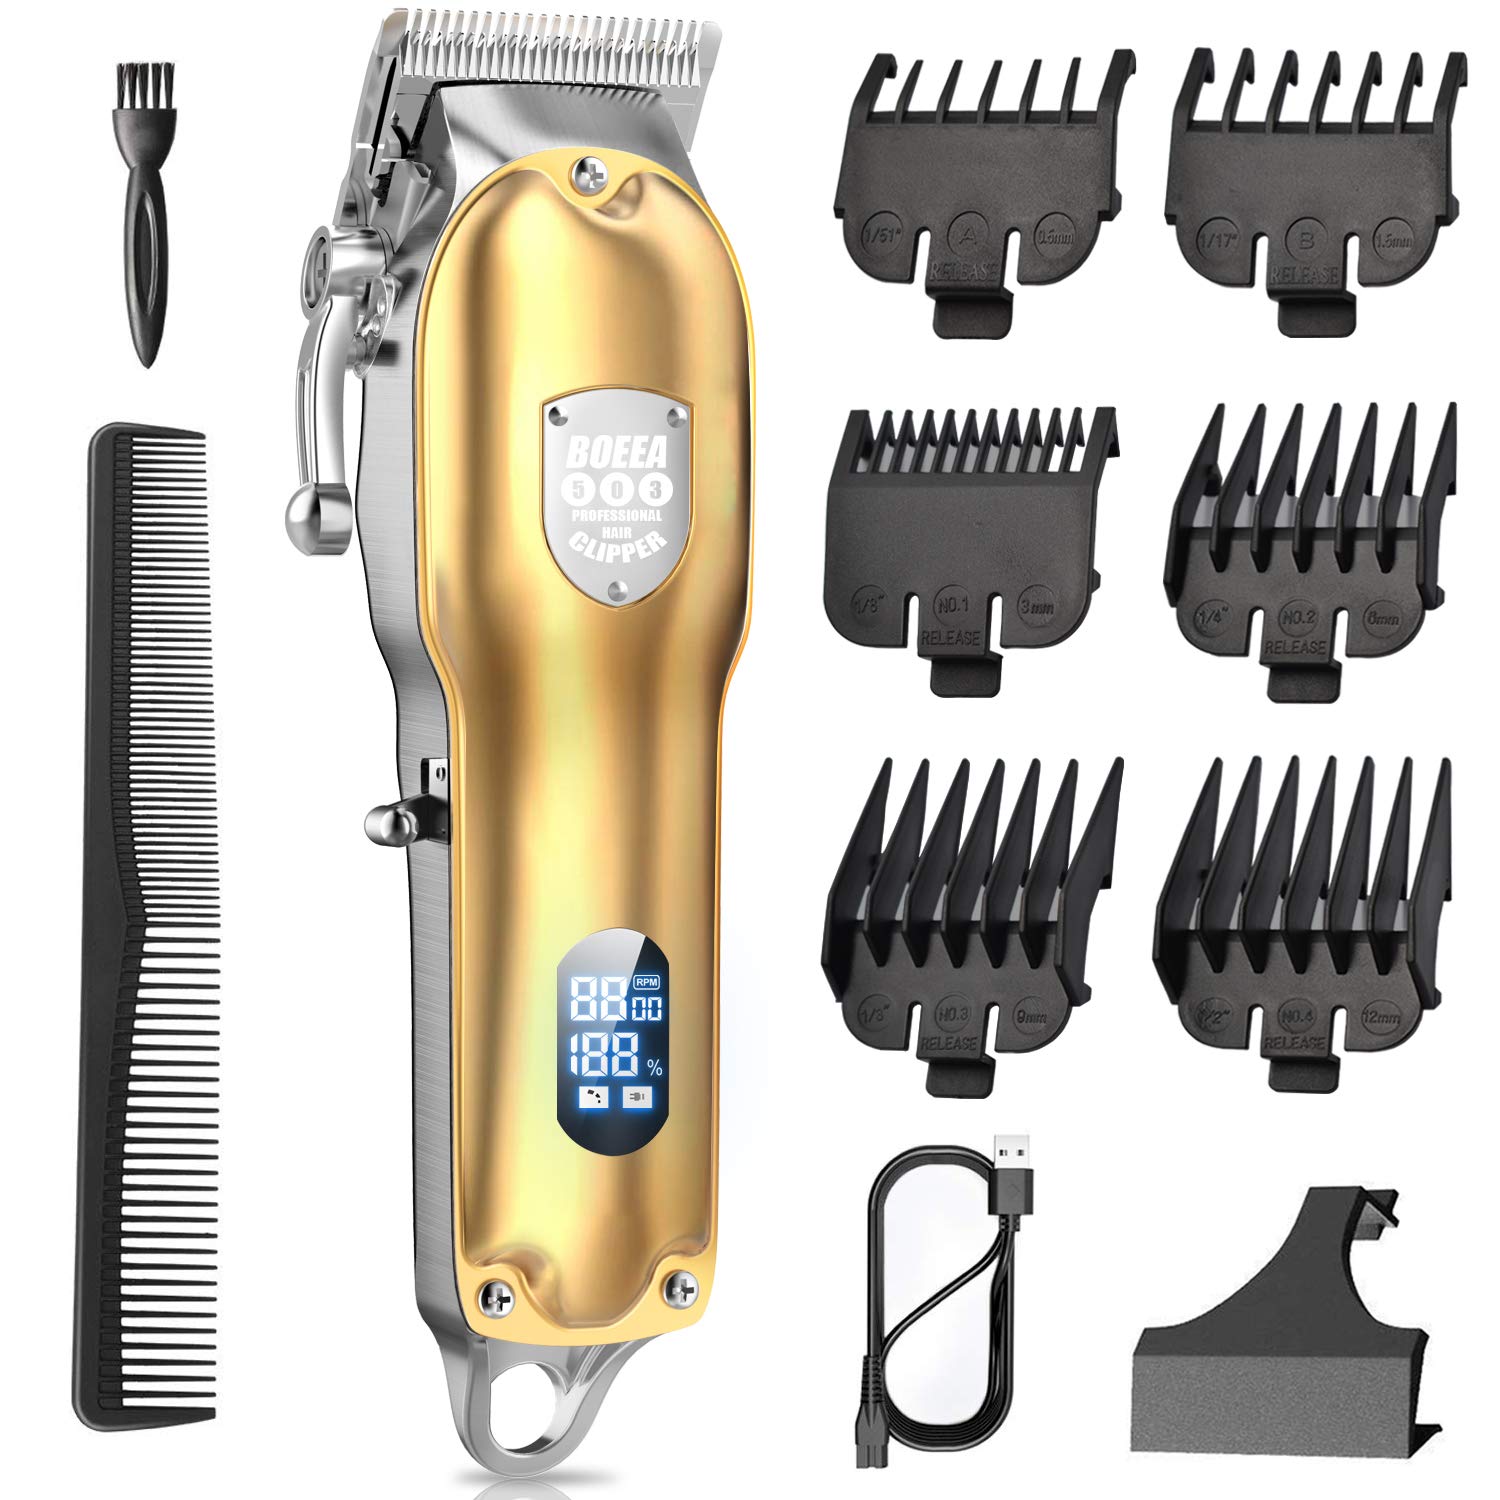 BOEEA Hair Clippers for Men Professional Cordless Clippers for Hair Cutting,Rechargeable Electric Haircut Kit for Home and Barbers, LED Display,Gold - Home Decor Gifts and More